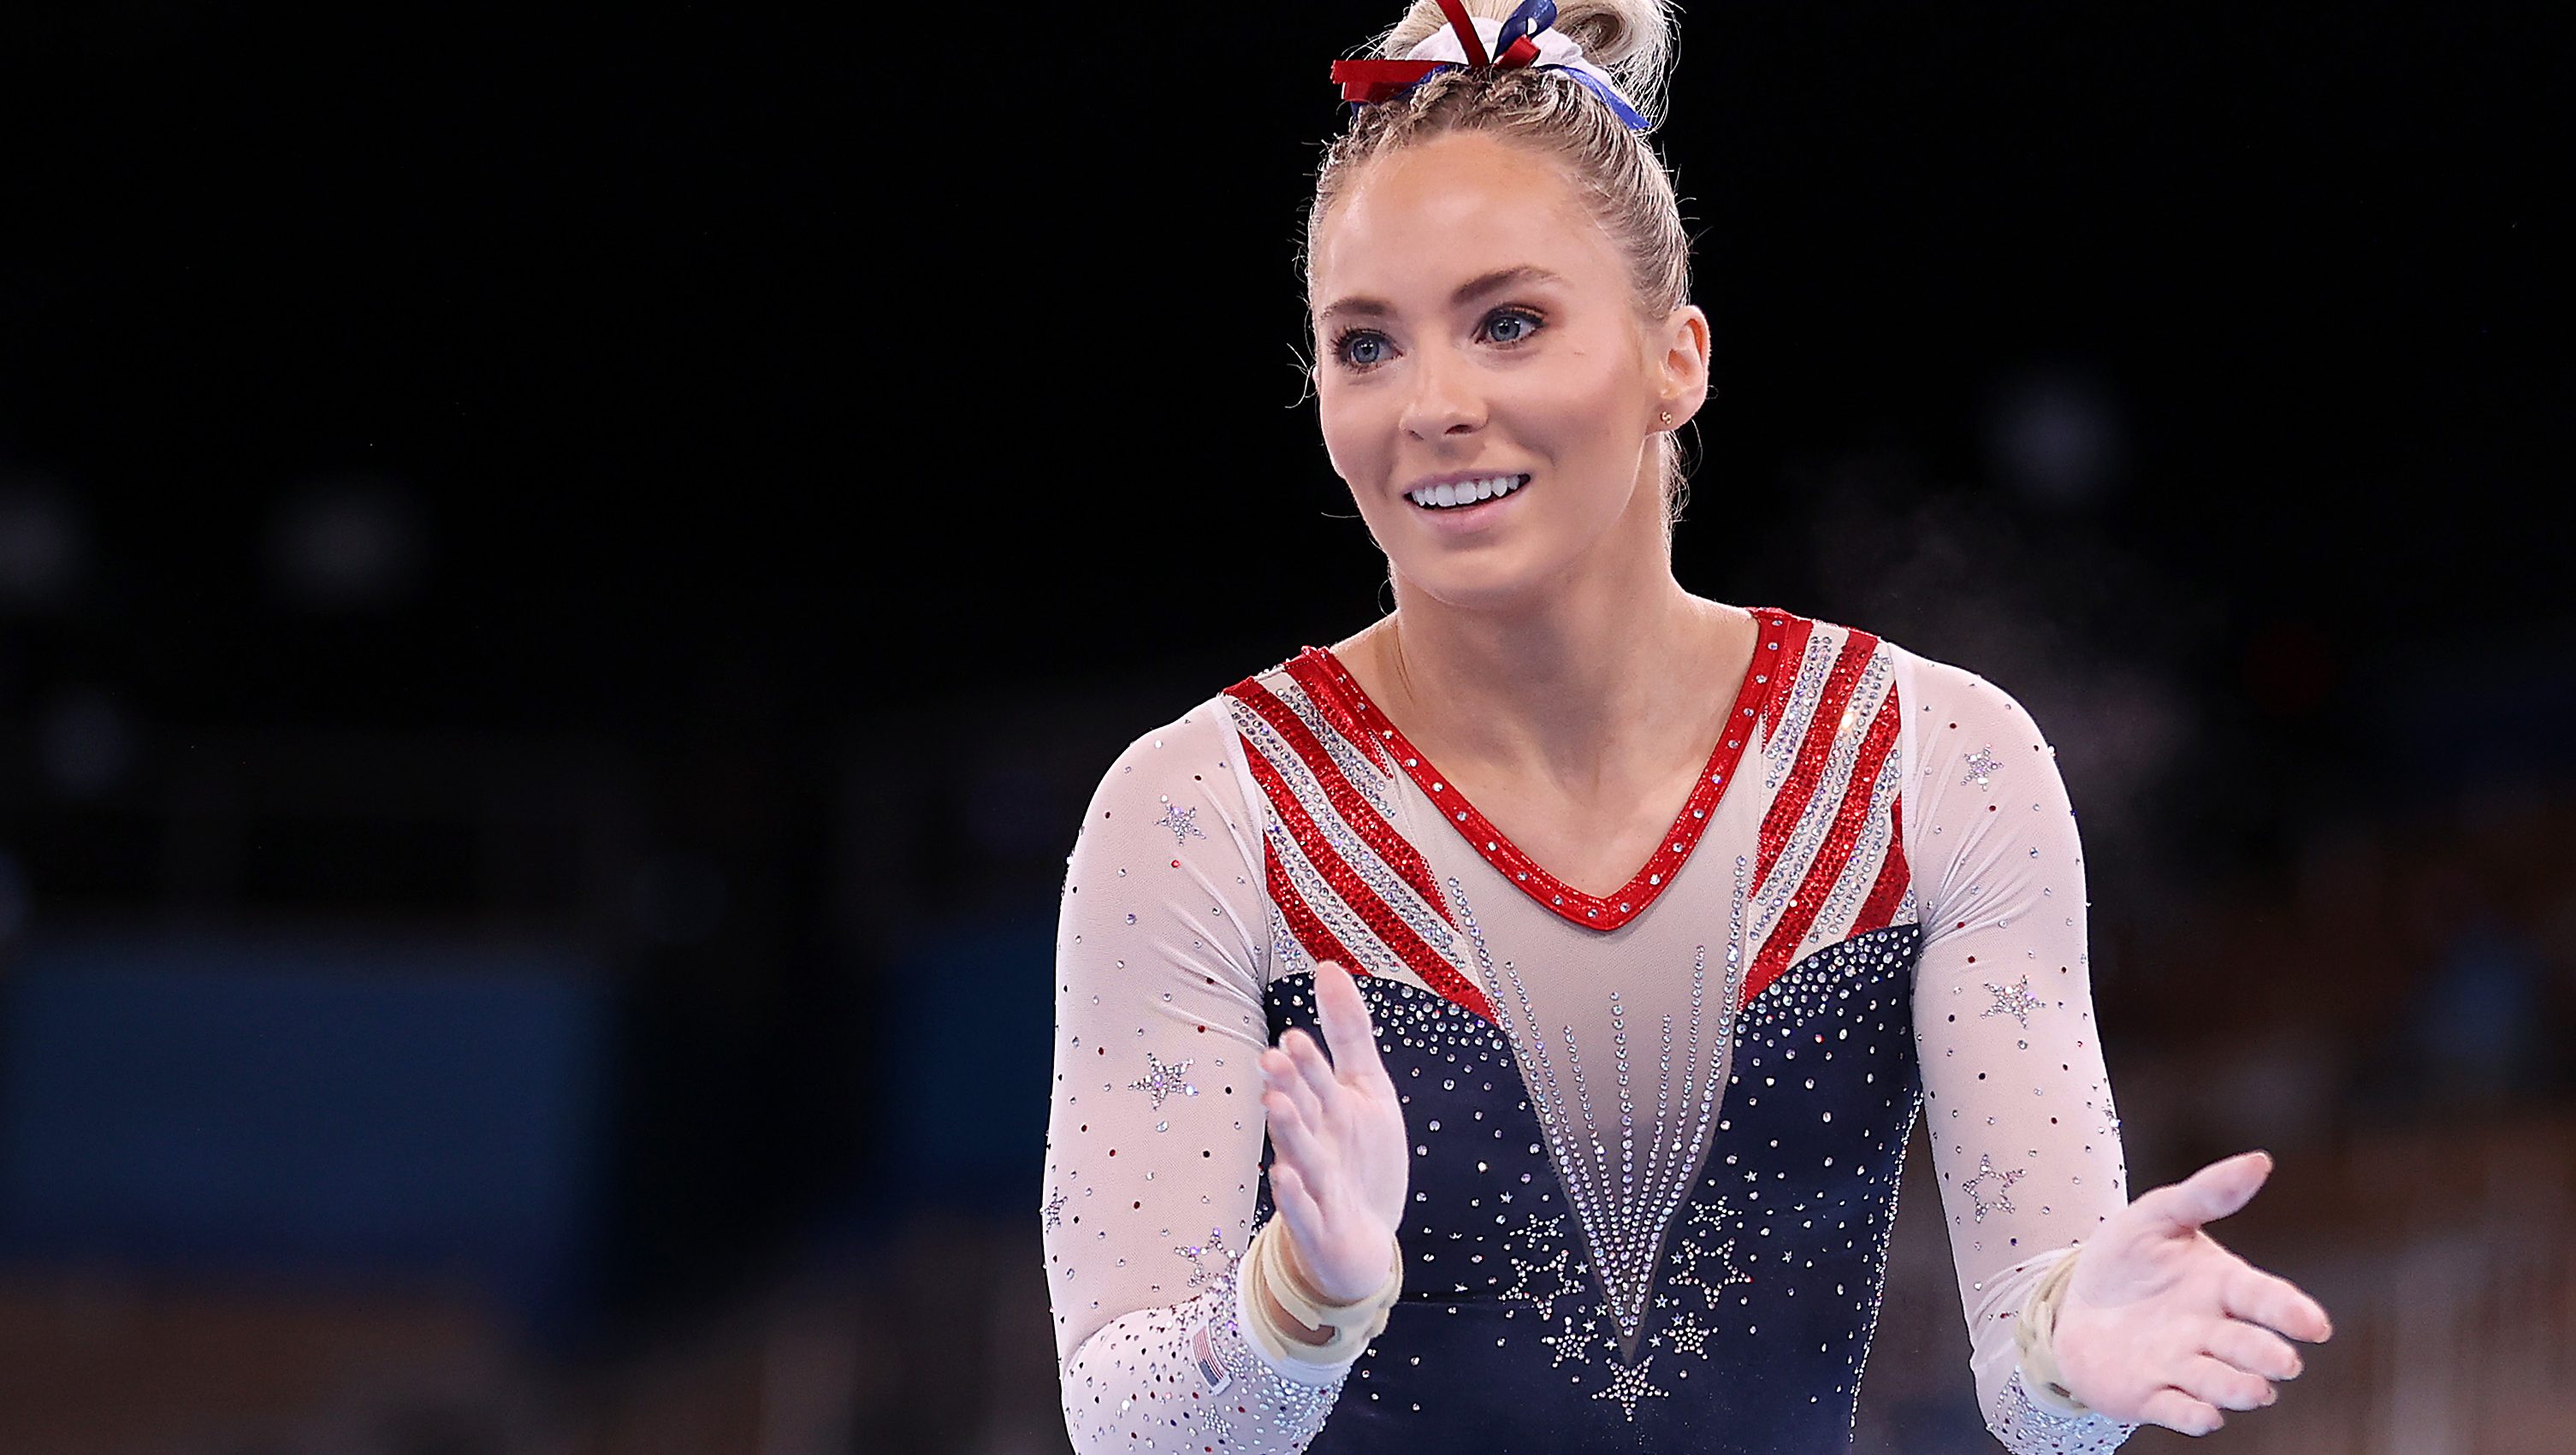 Gymnast MyKayla Skinner Apologizes After Backlash Over Harsh Comments About Team USA